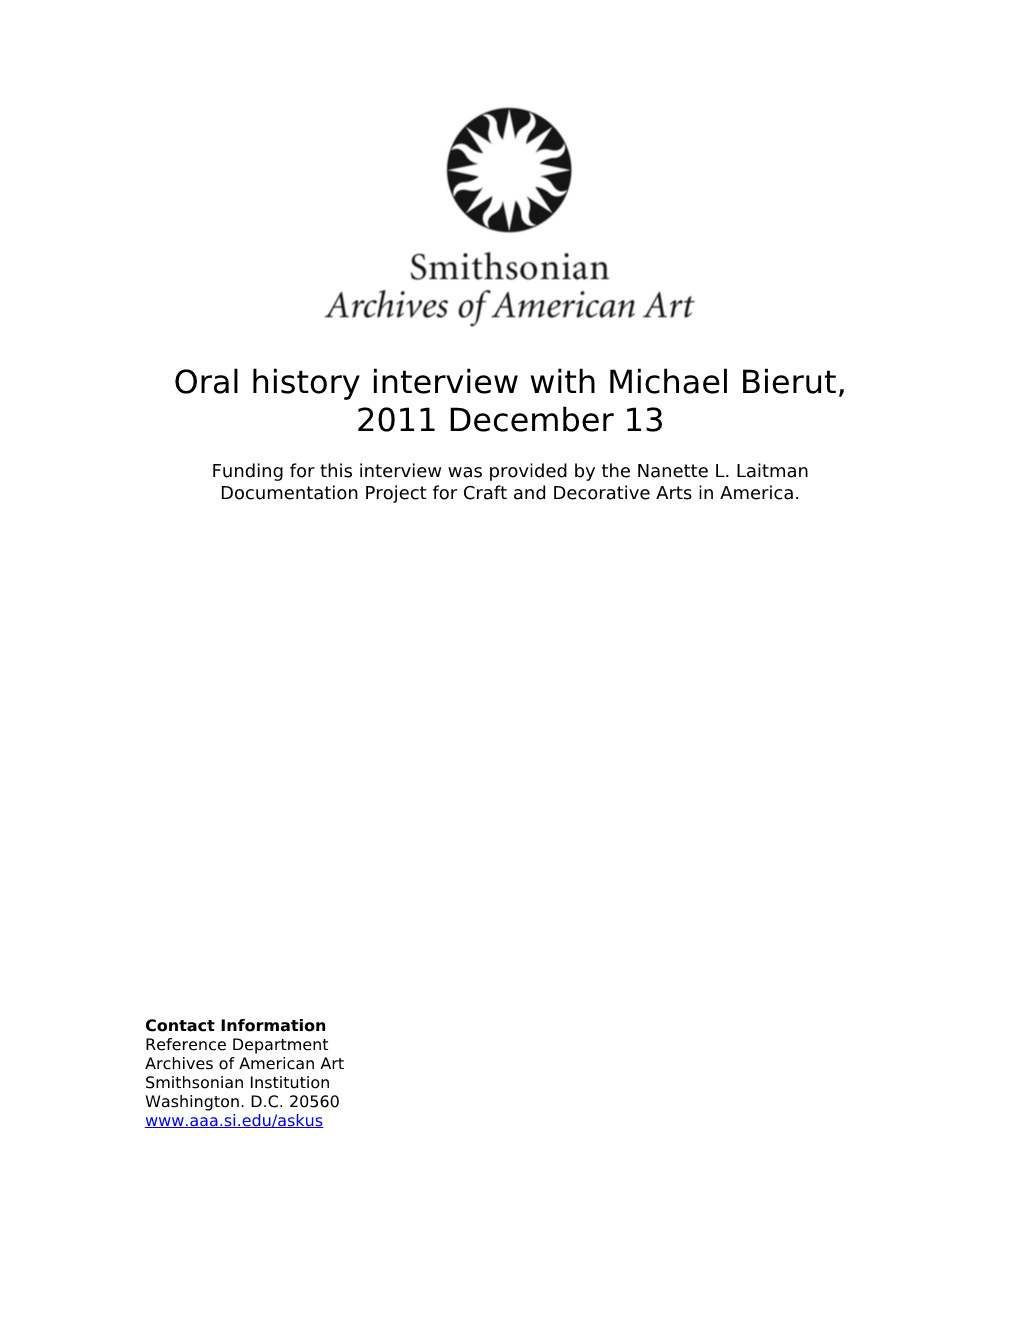 Oral History Interview with Michael Bierut, 2011 December 13